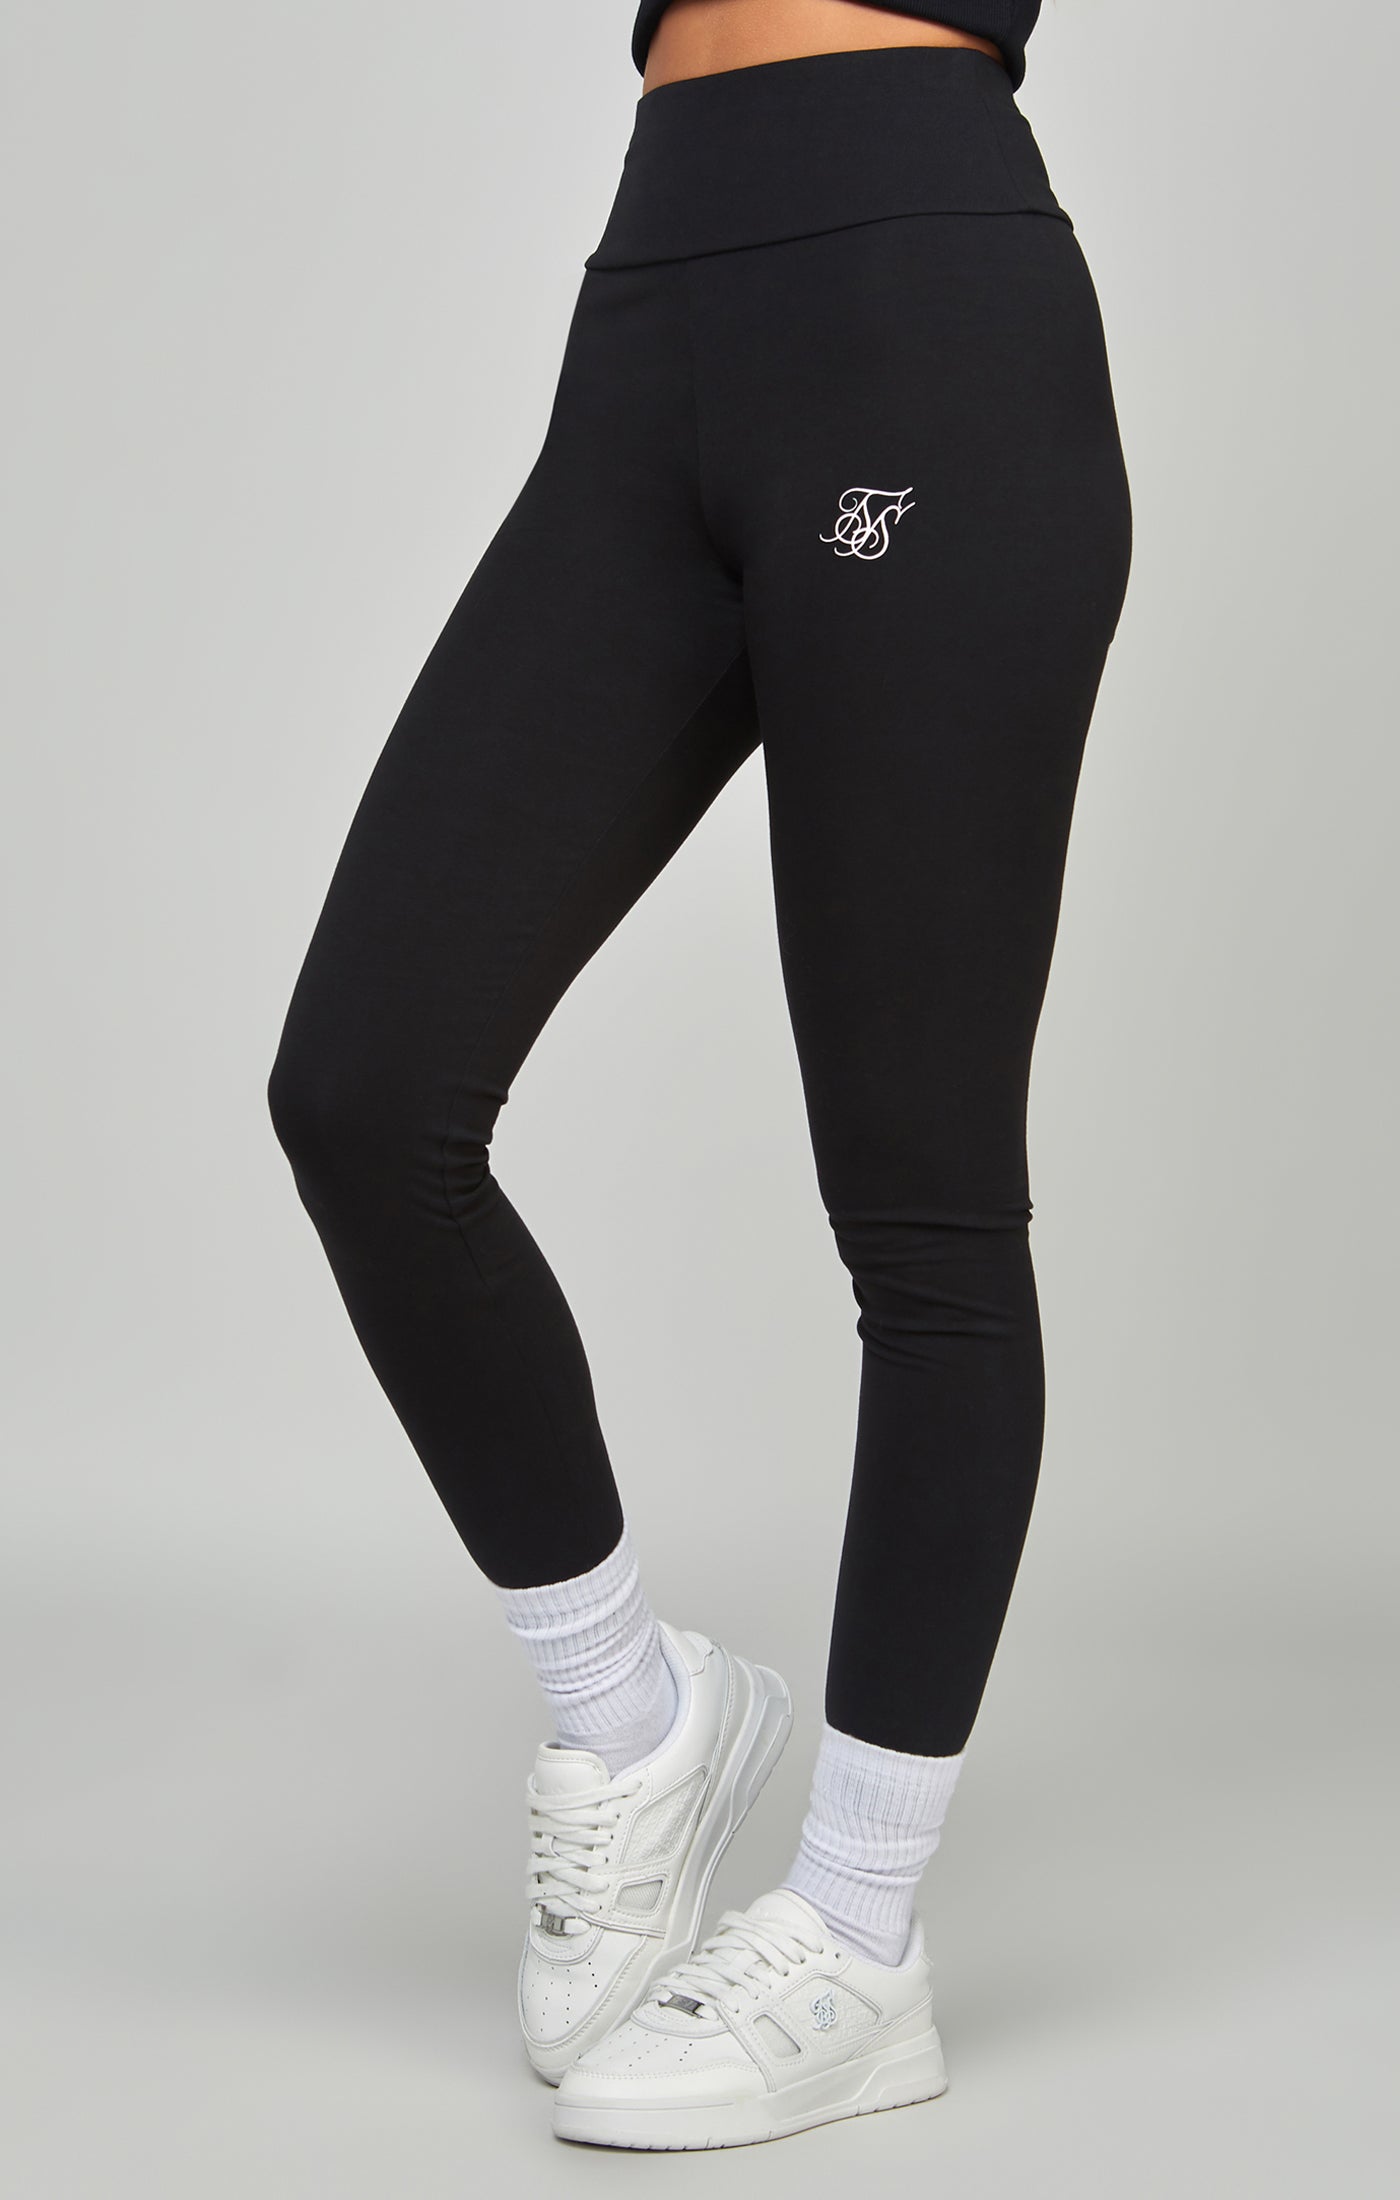 Load image into Gallery viewer, Black High Waist Leggings